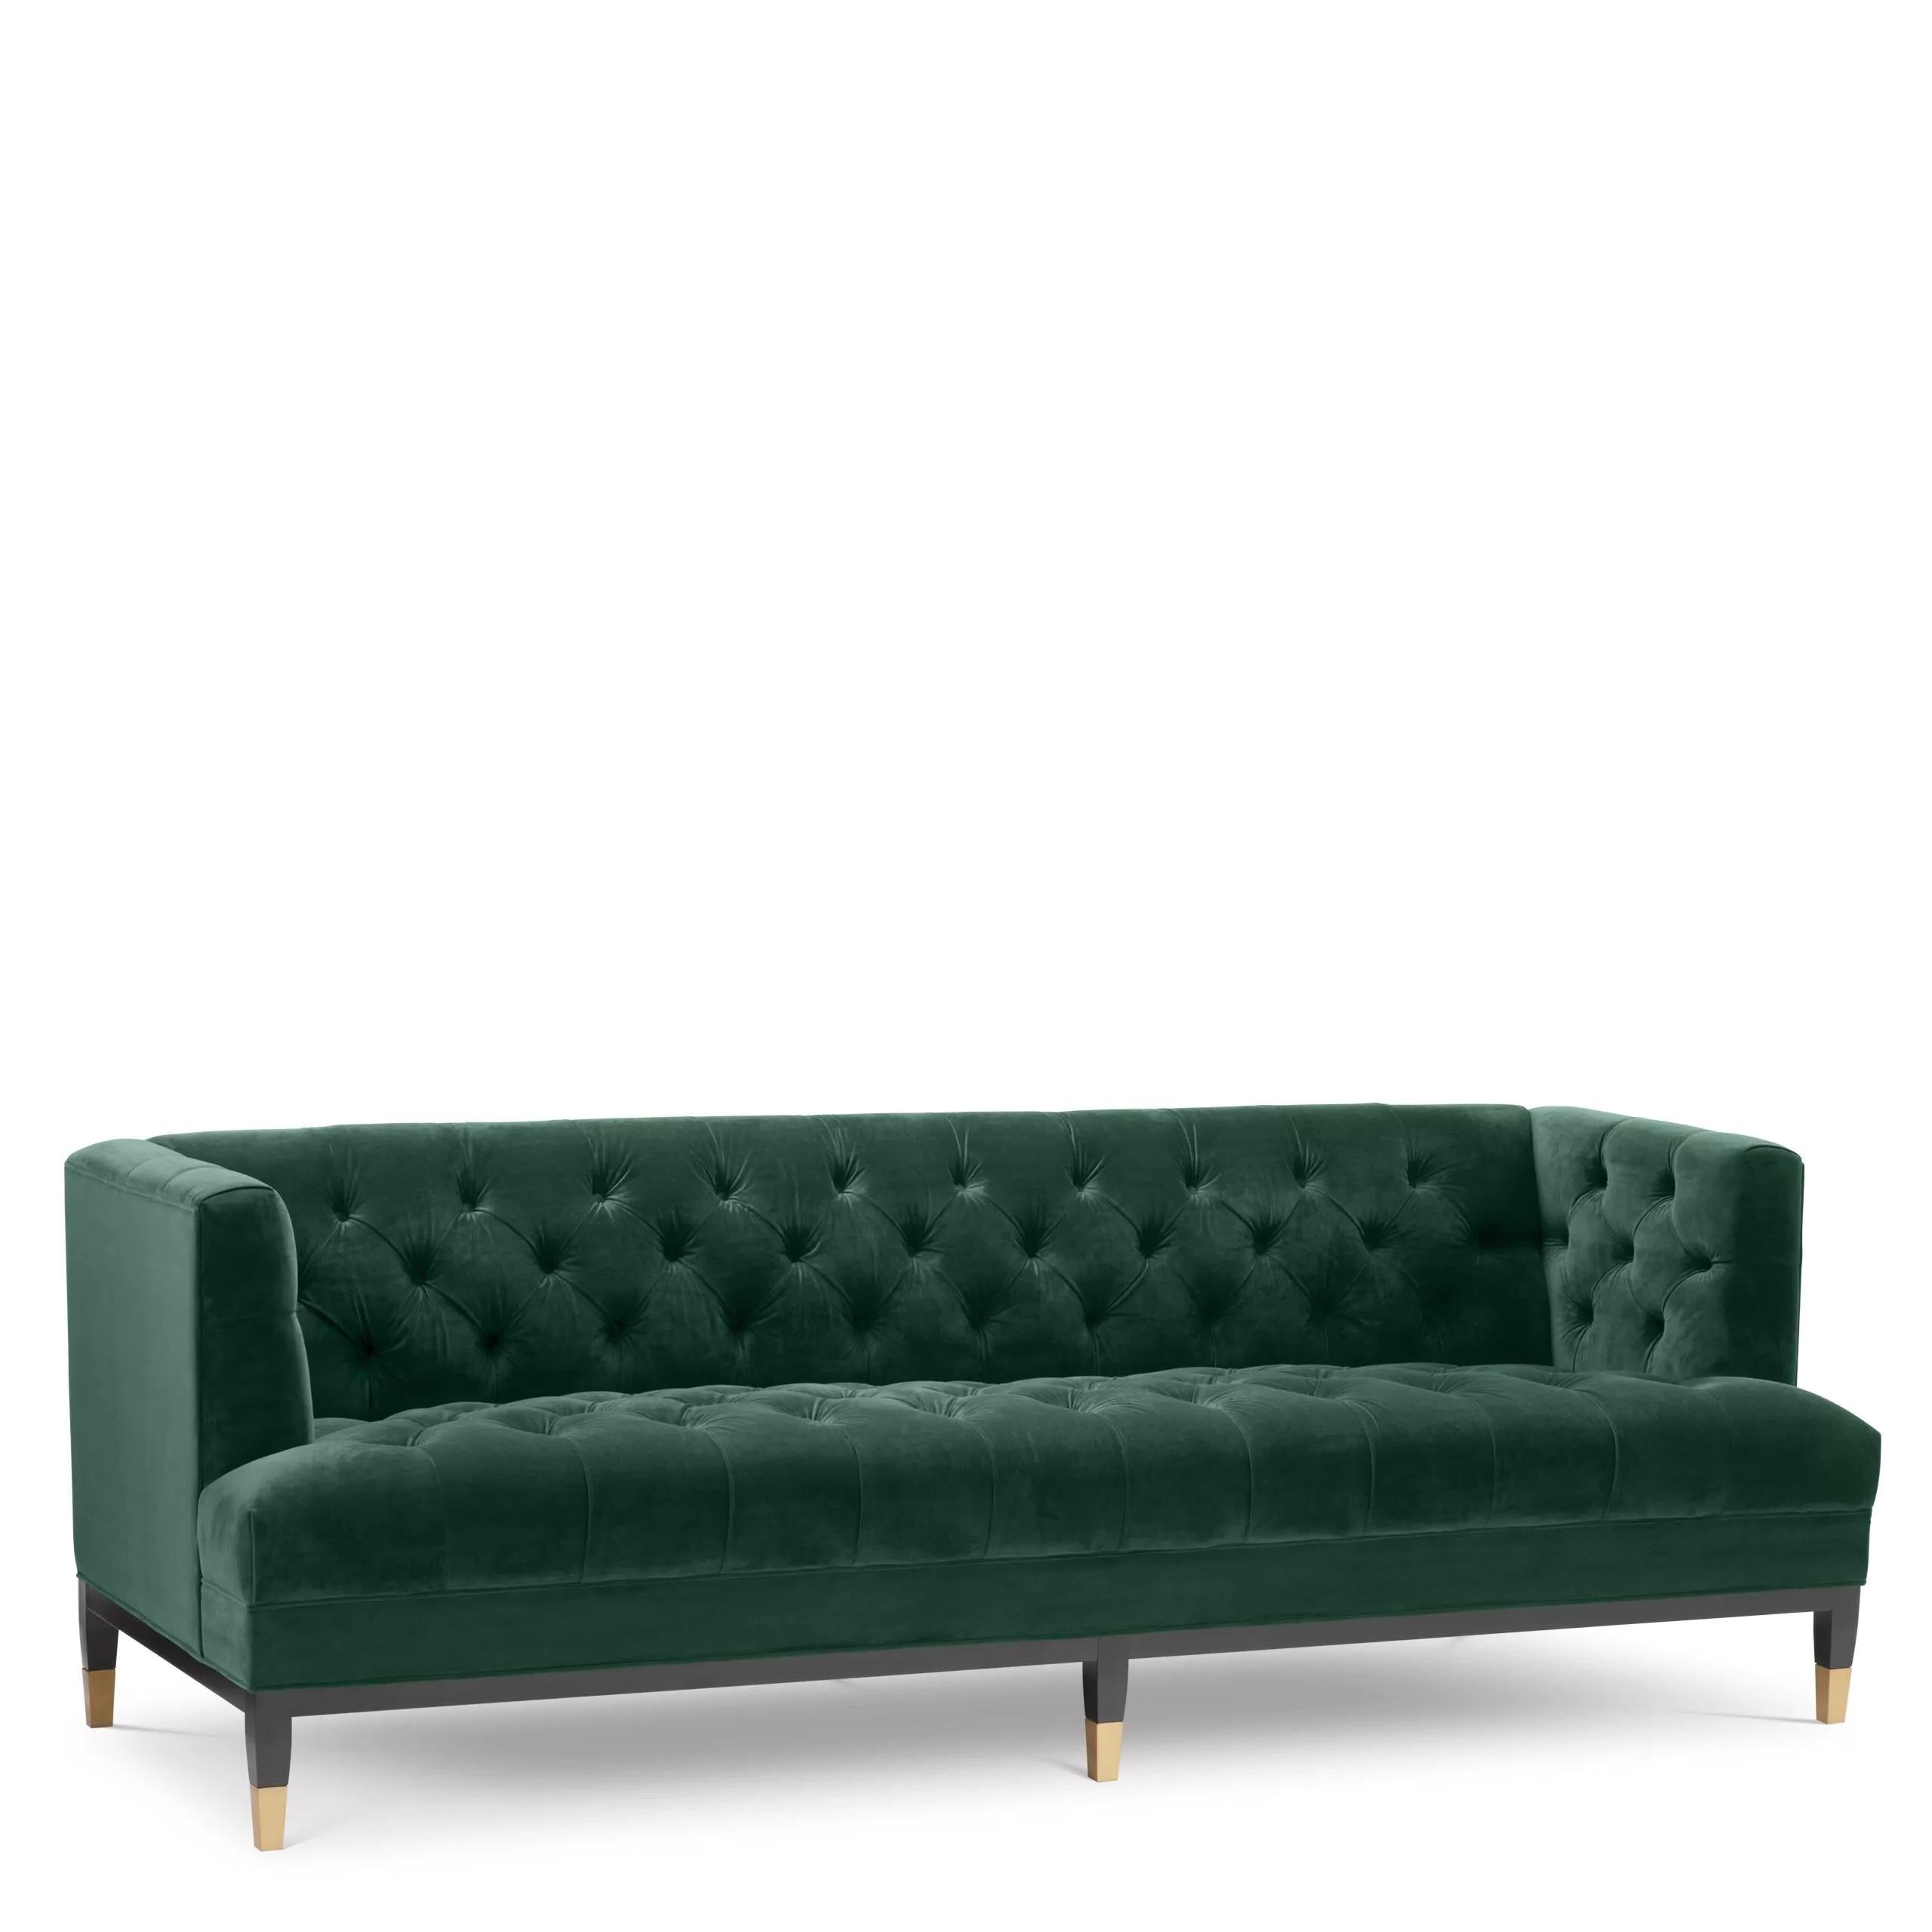 Black lacquered wooden feet and deep green velvet colored comfy Chesterfield style sofa